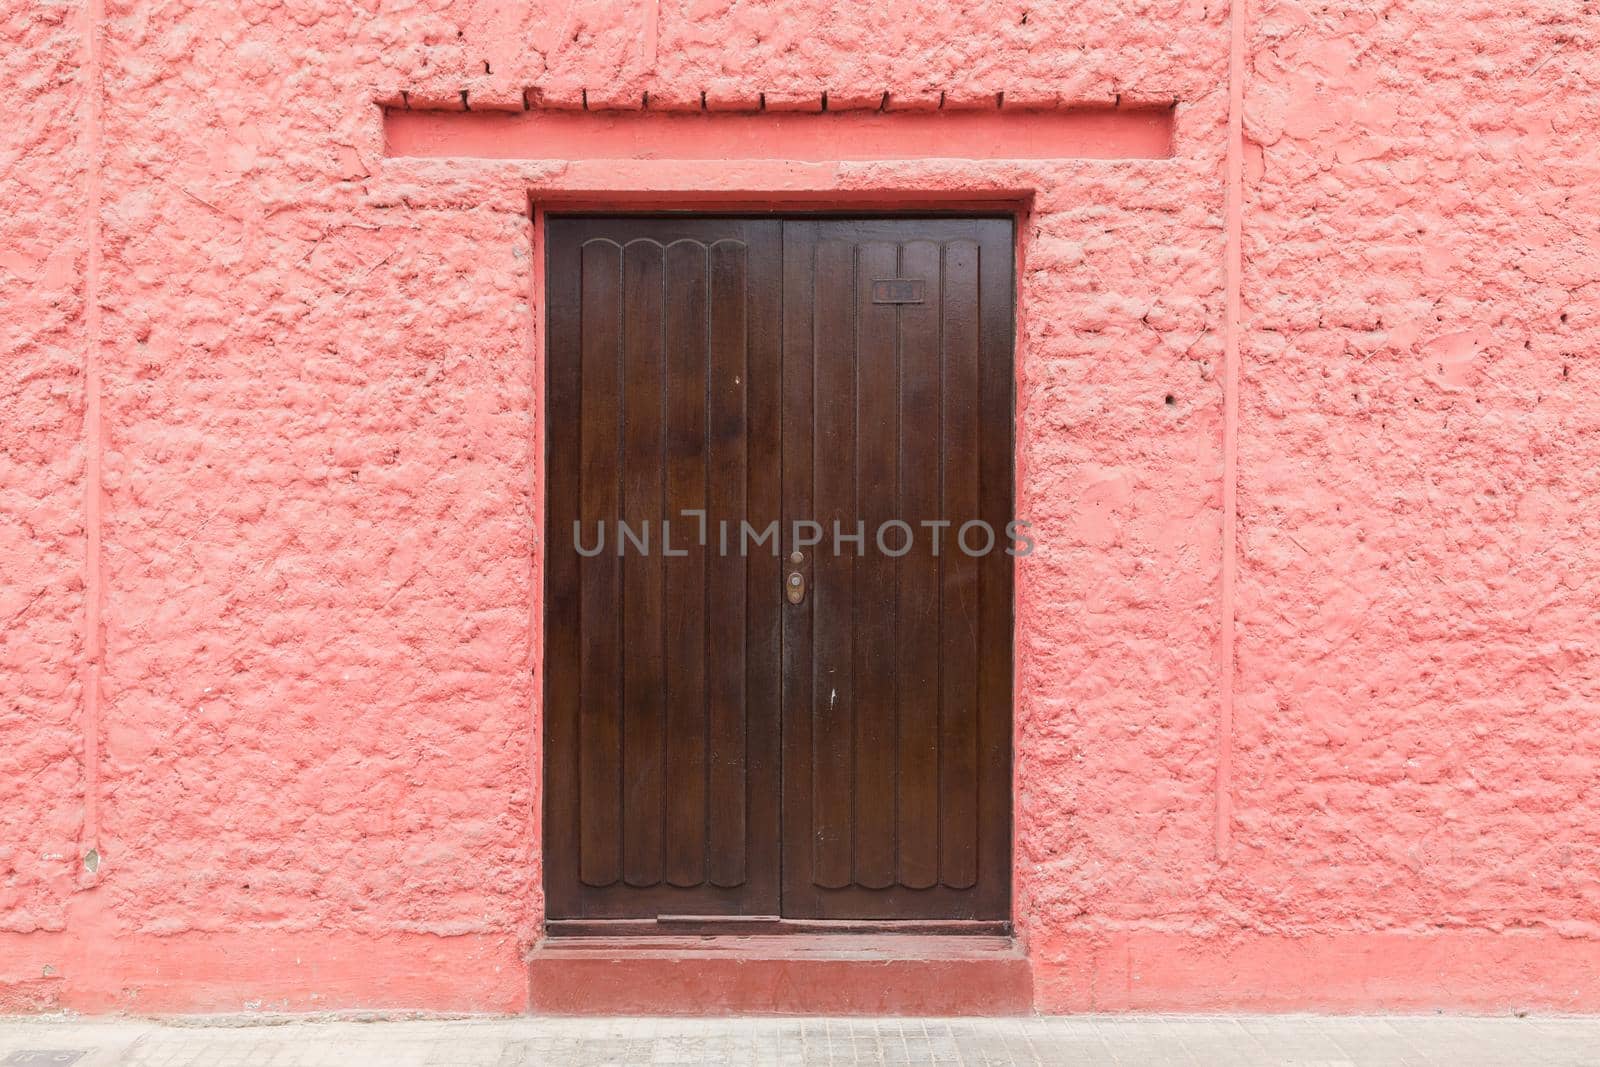 Lima, Peru - September 03, 2015: Photograph of a pink wall with a wooden door.